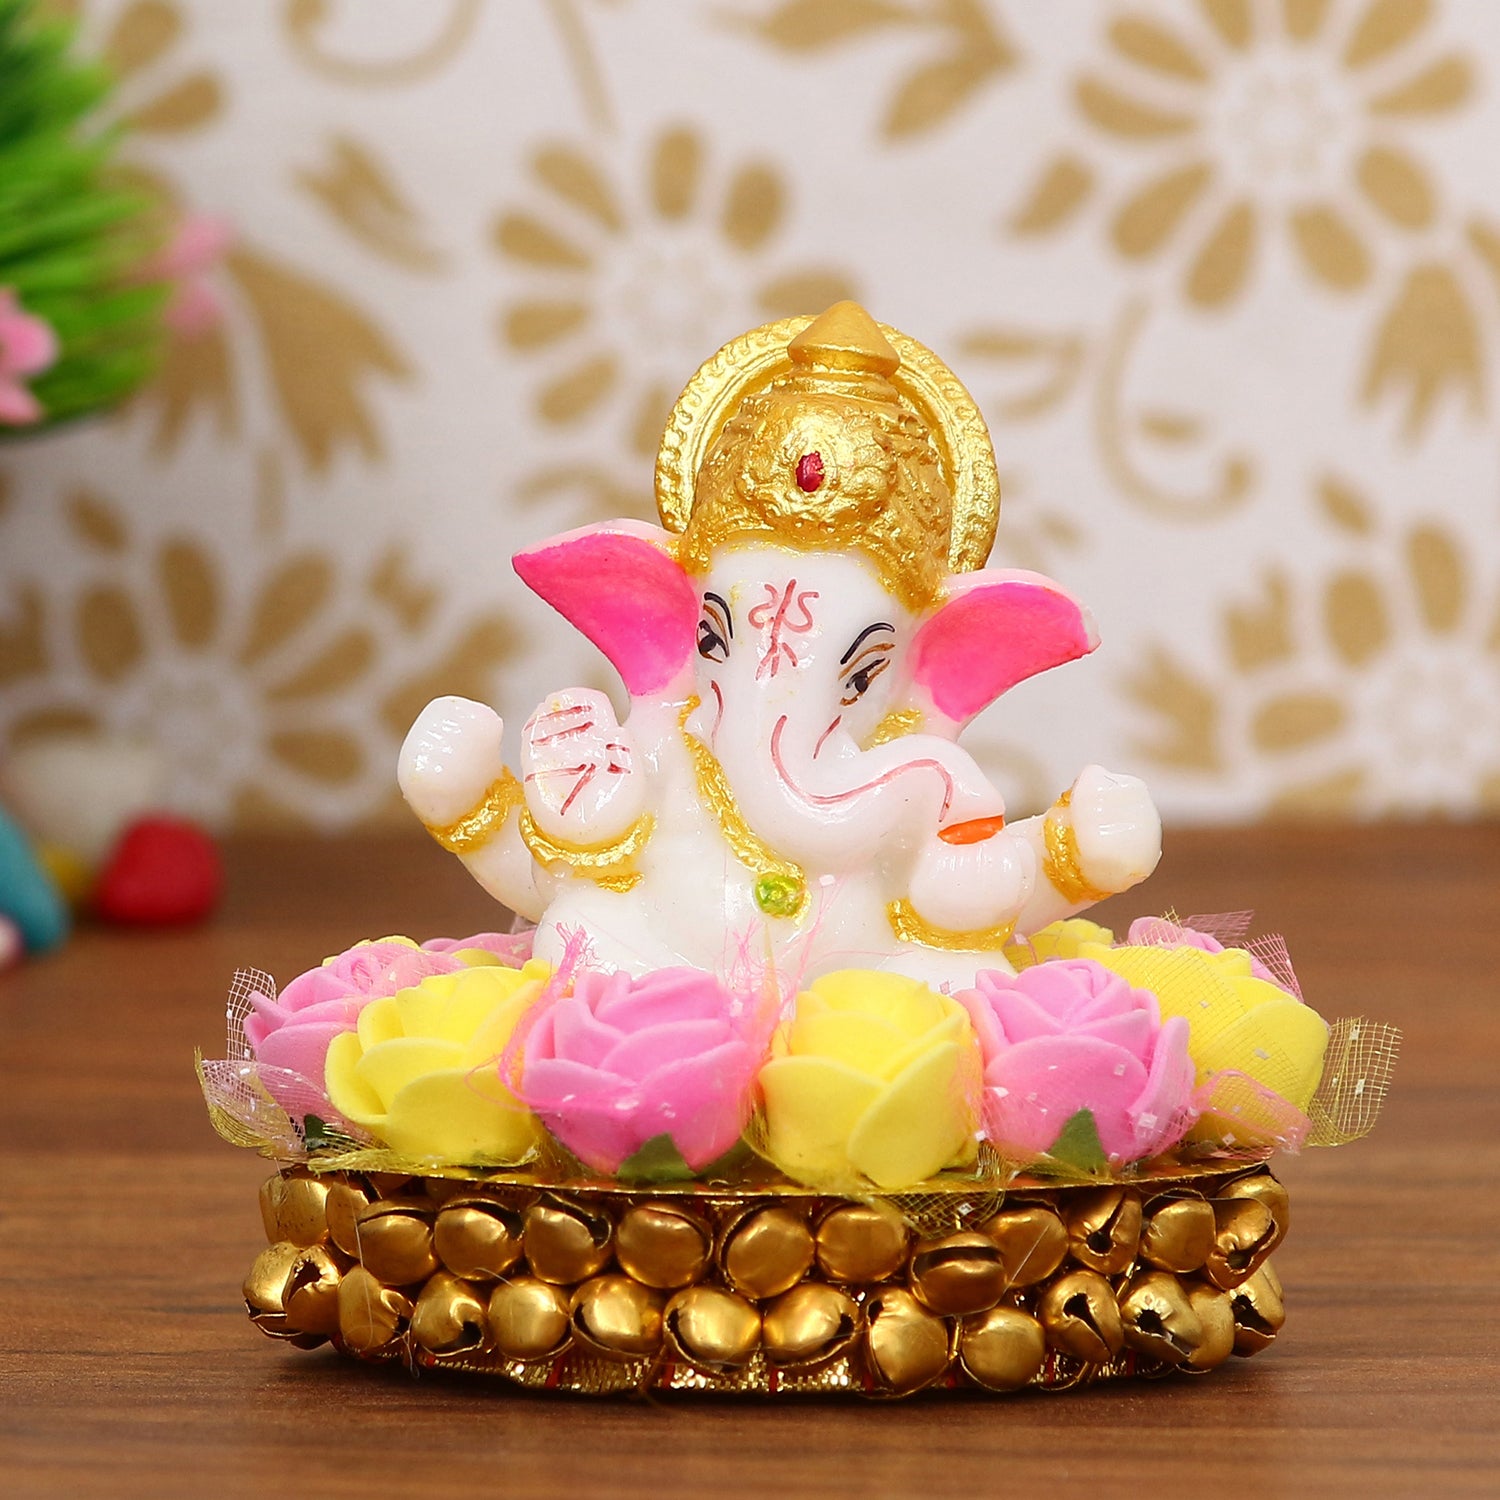 Golden and White Polyresin Lord Ganesha Idol on Decorative Handcrafted Plate with Pink and Yellow Flowers